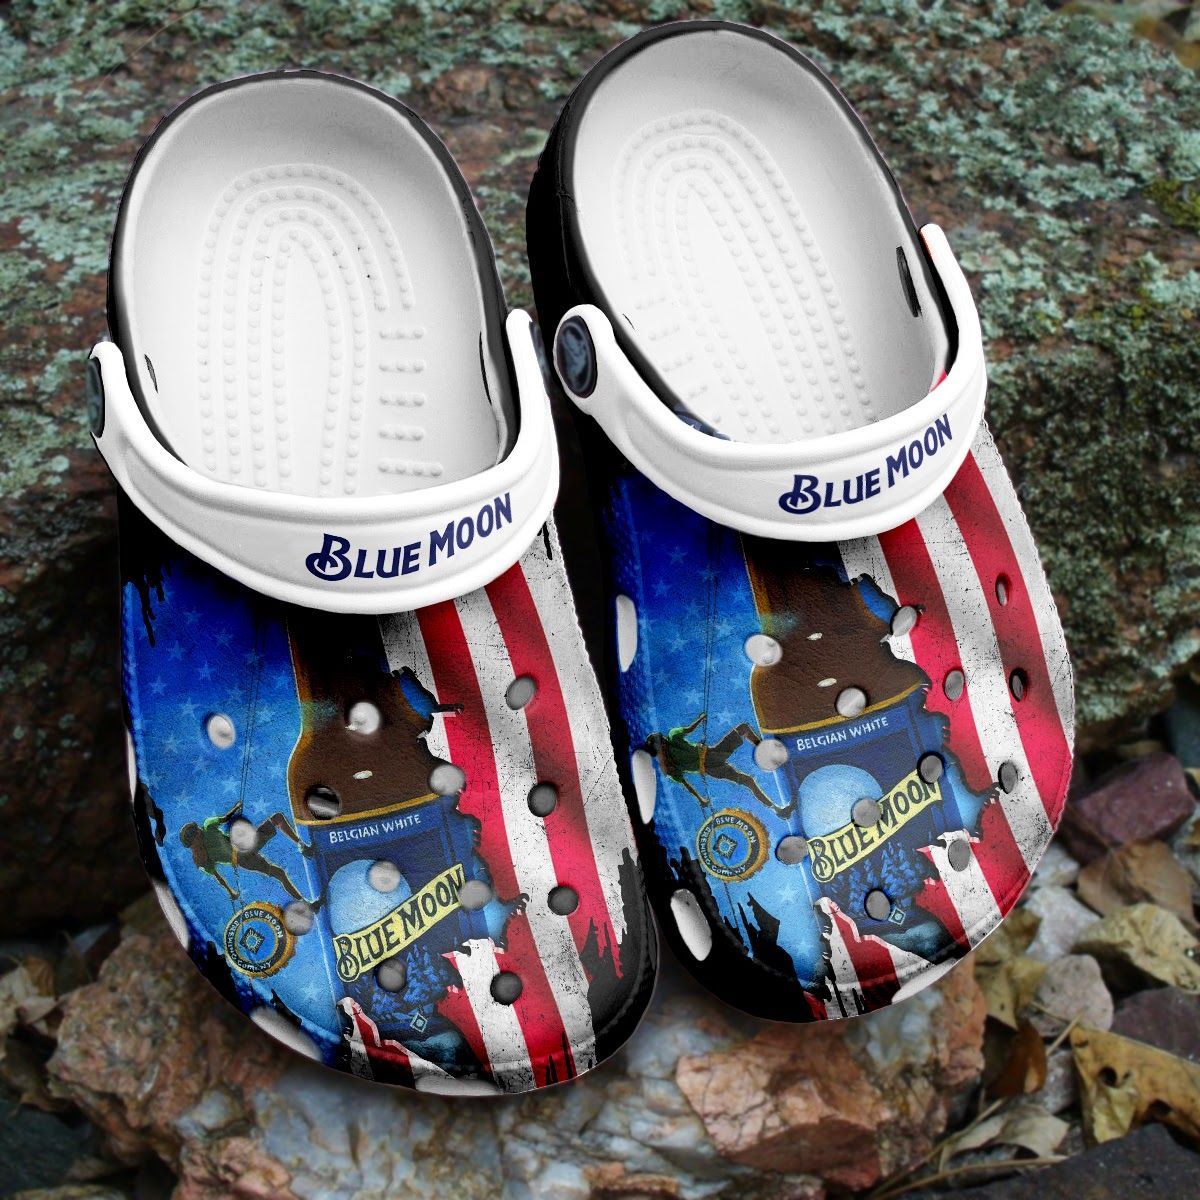 If you'd like to purchase a pair of Crocband Clogs, be sure to check out the official website. 113